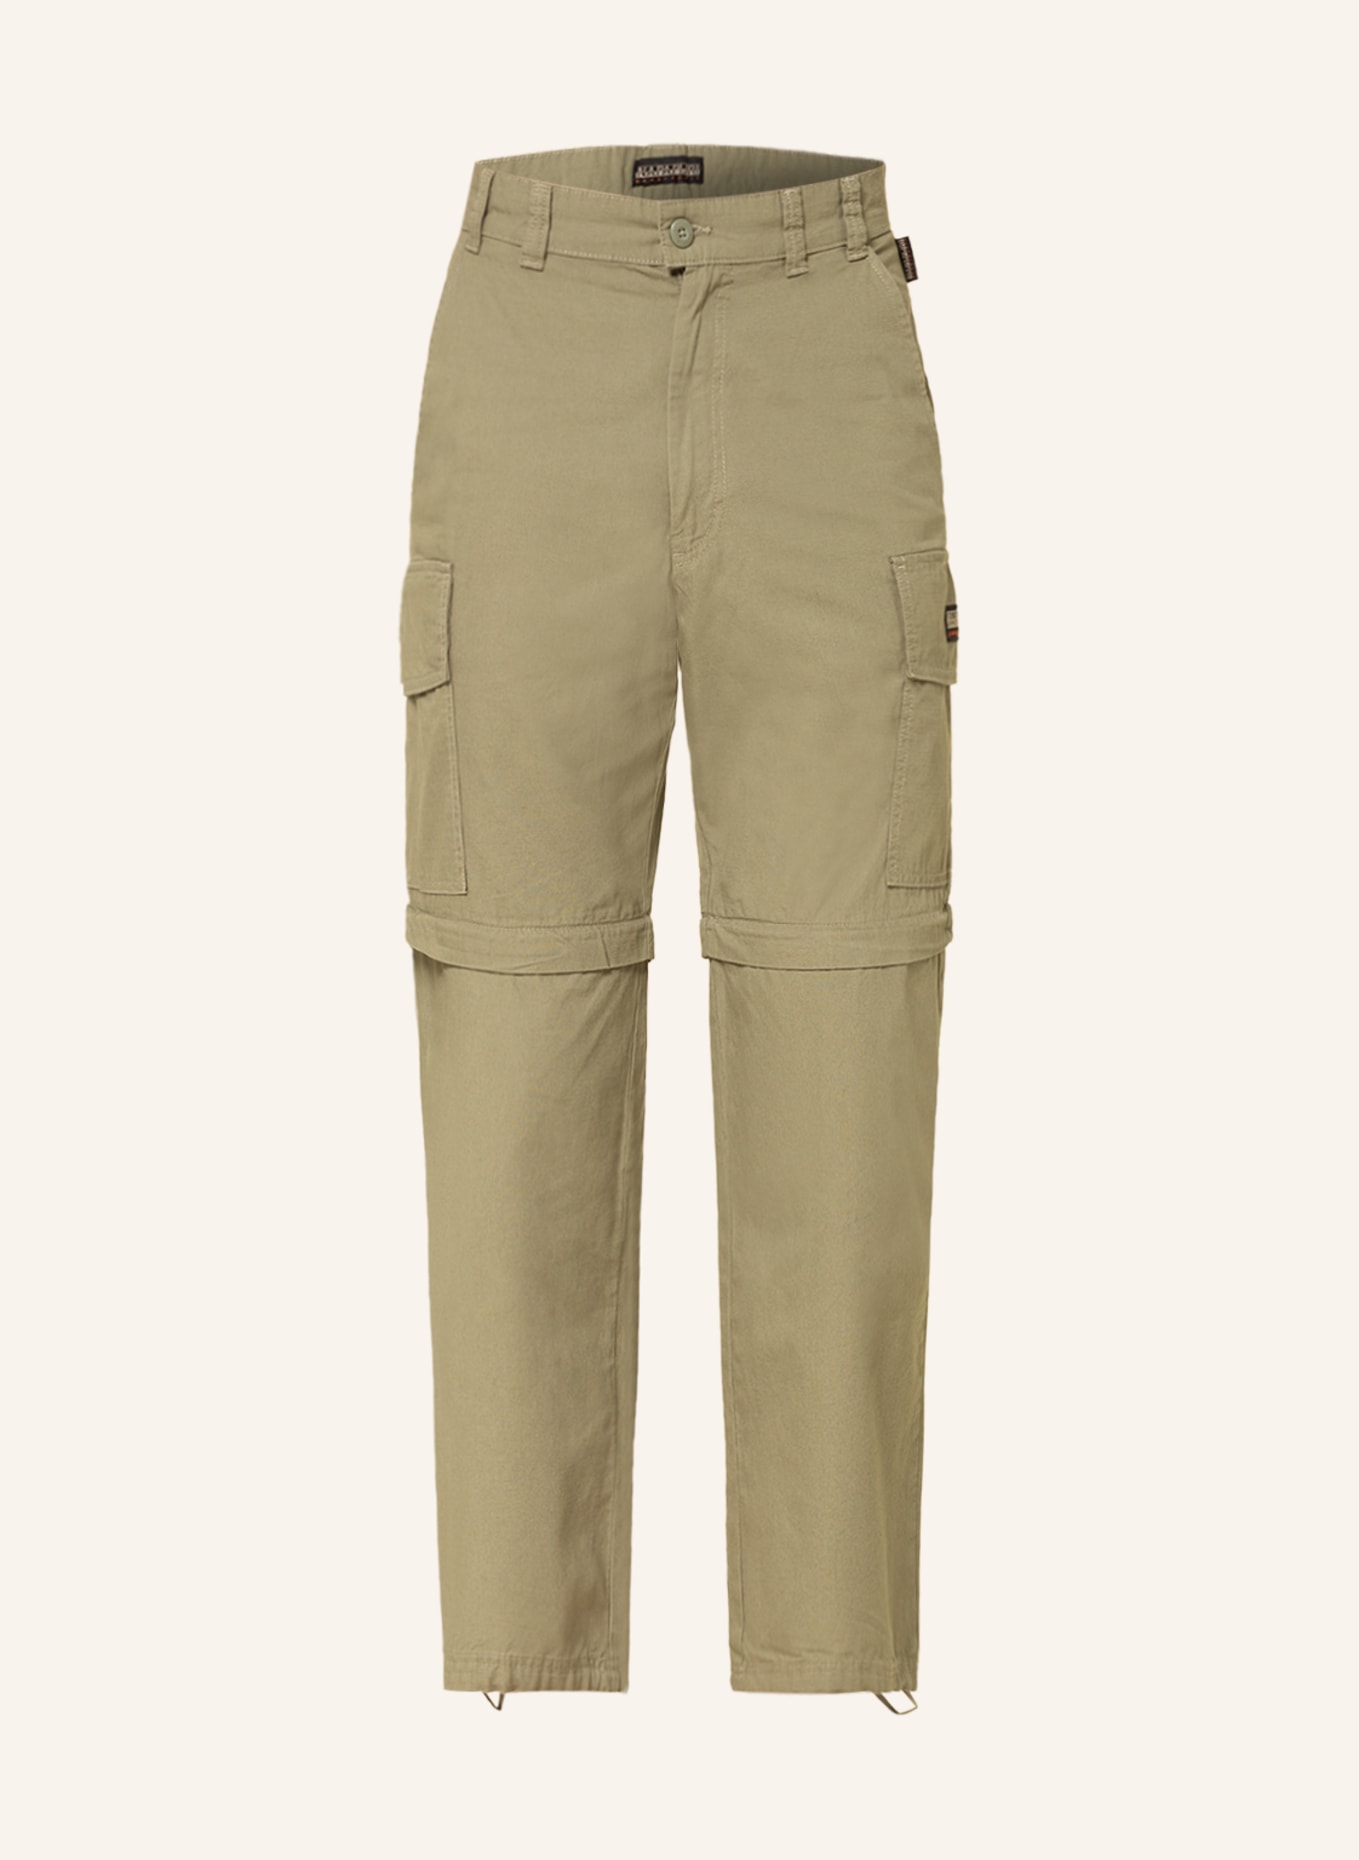 WORSHIP SUPPLIES Why Wait Zip Off Cargo Pant | Urban Outfitters